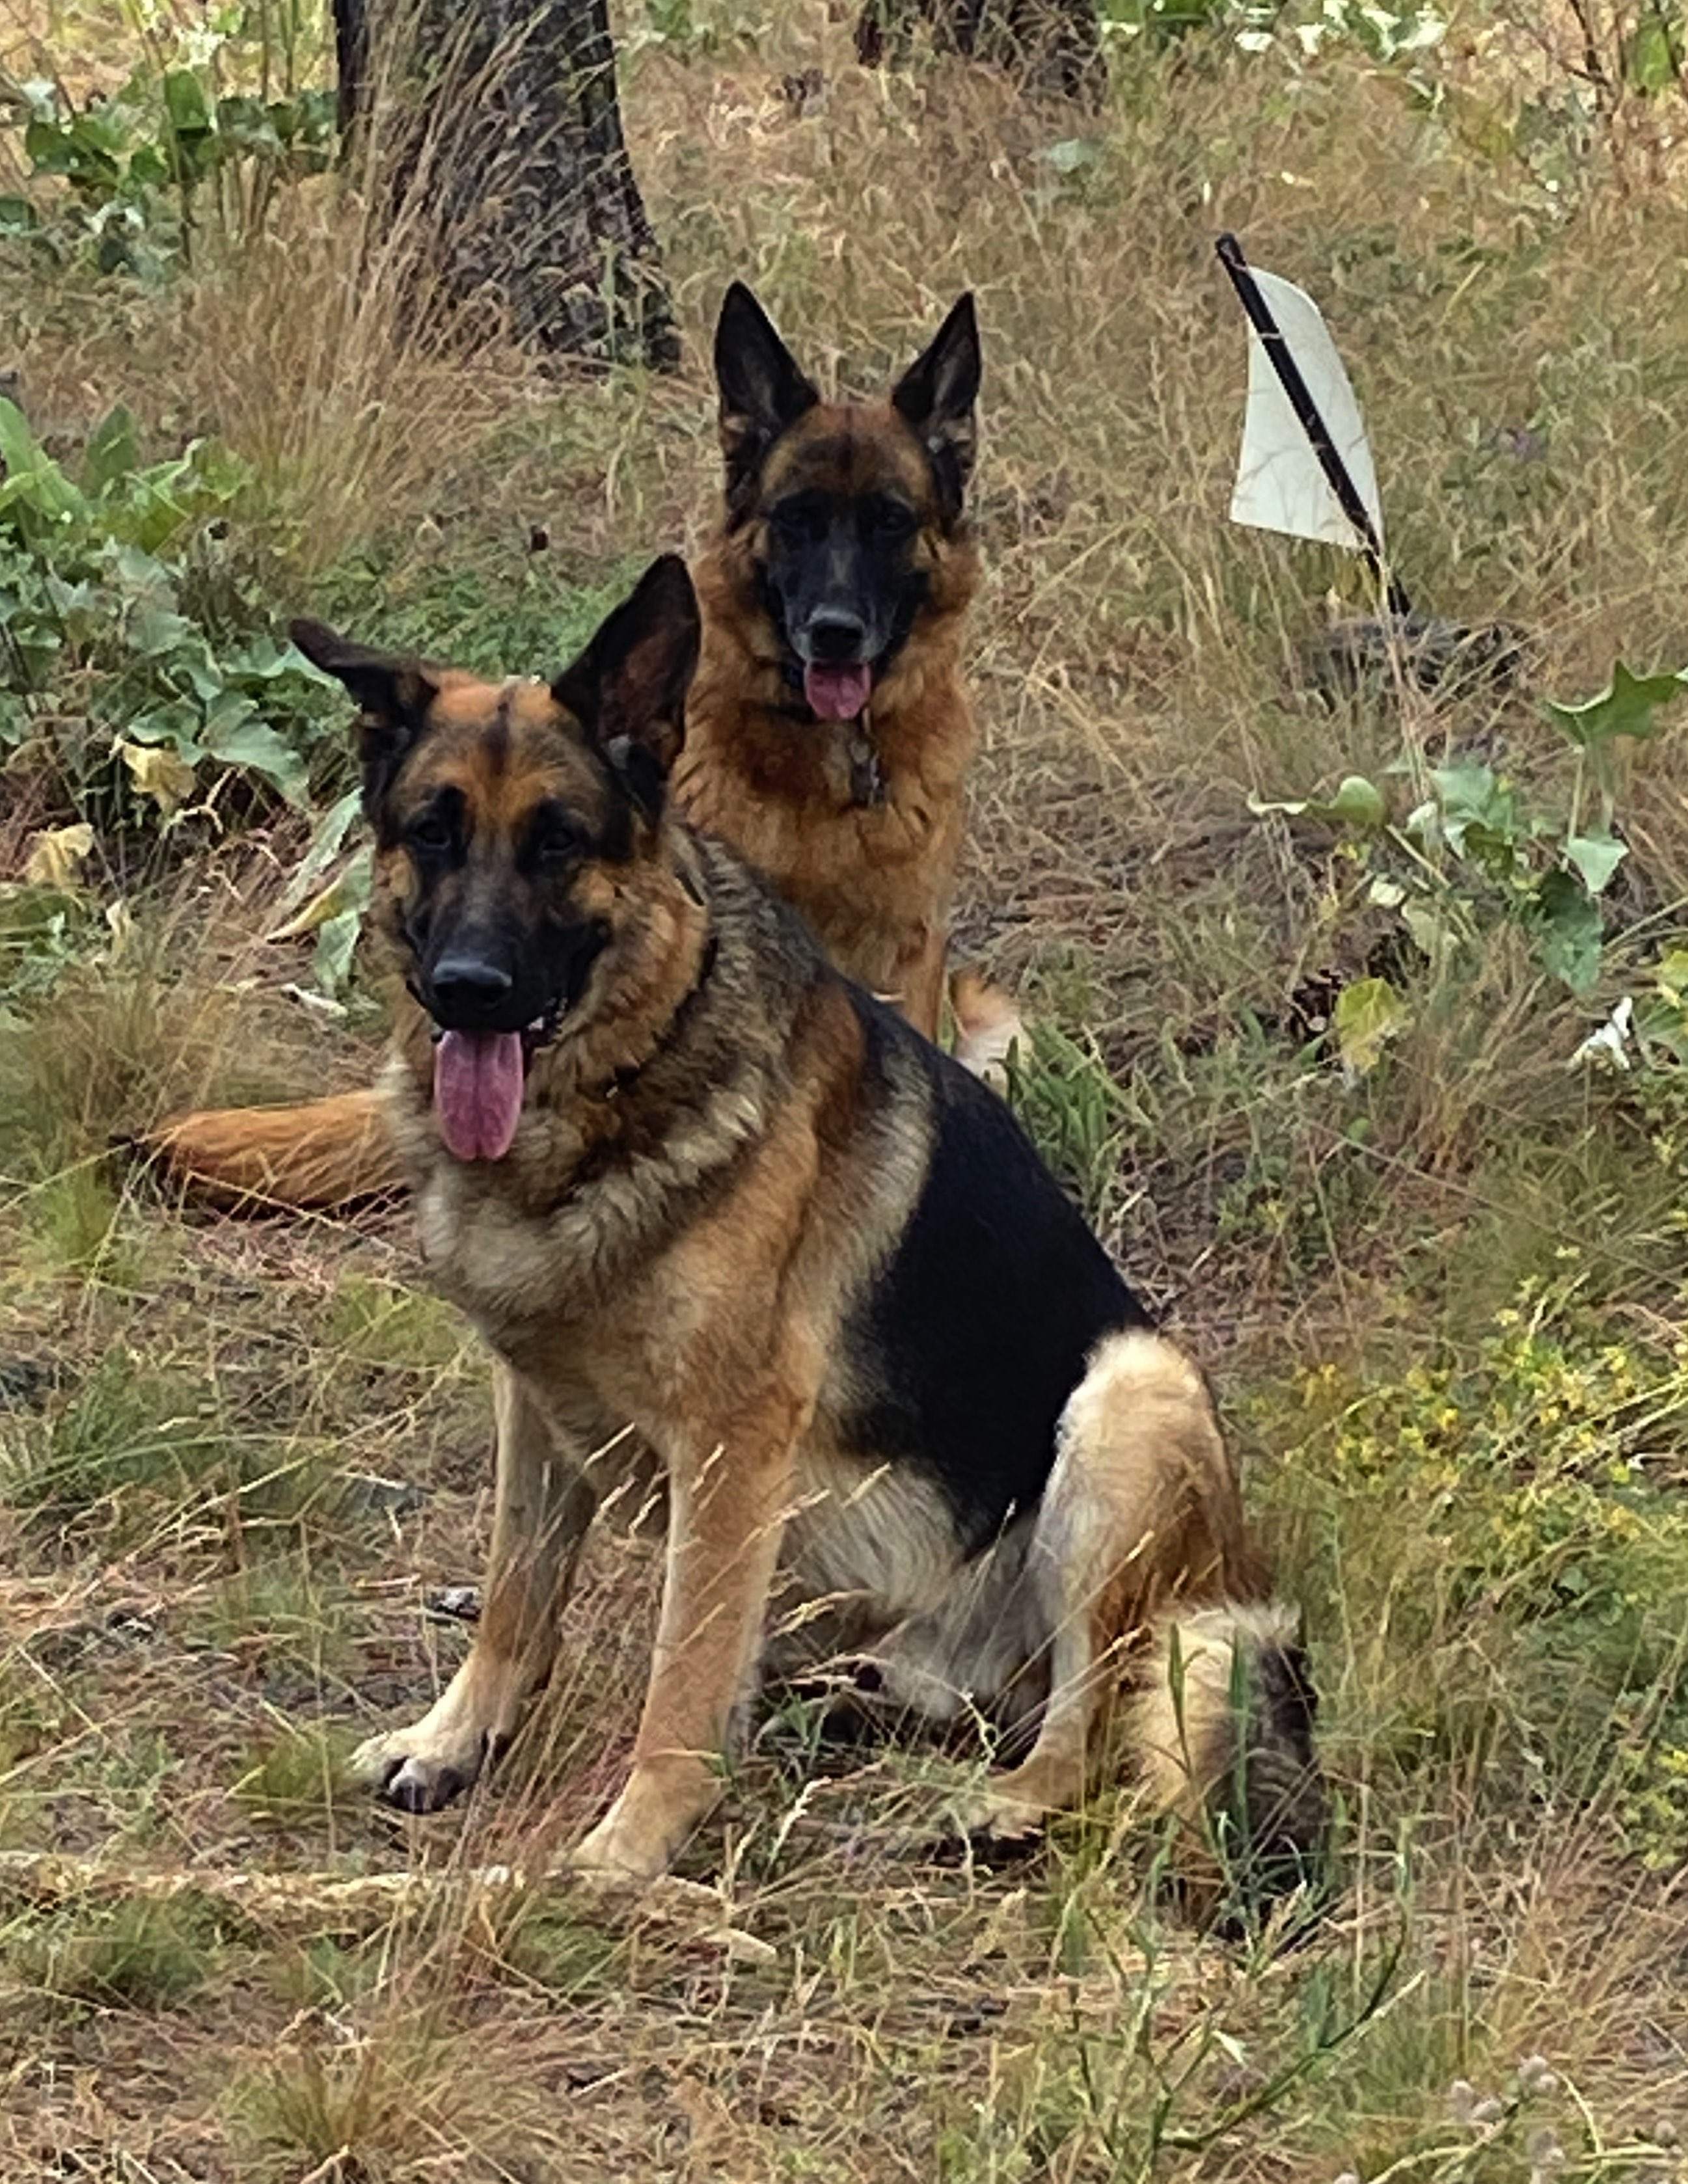 Four decades of experience with my German Shepherds